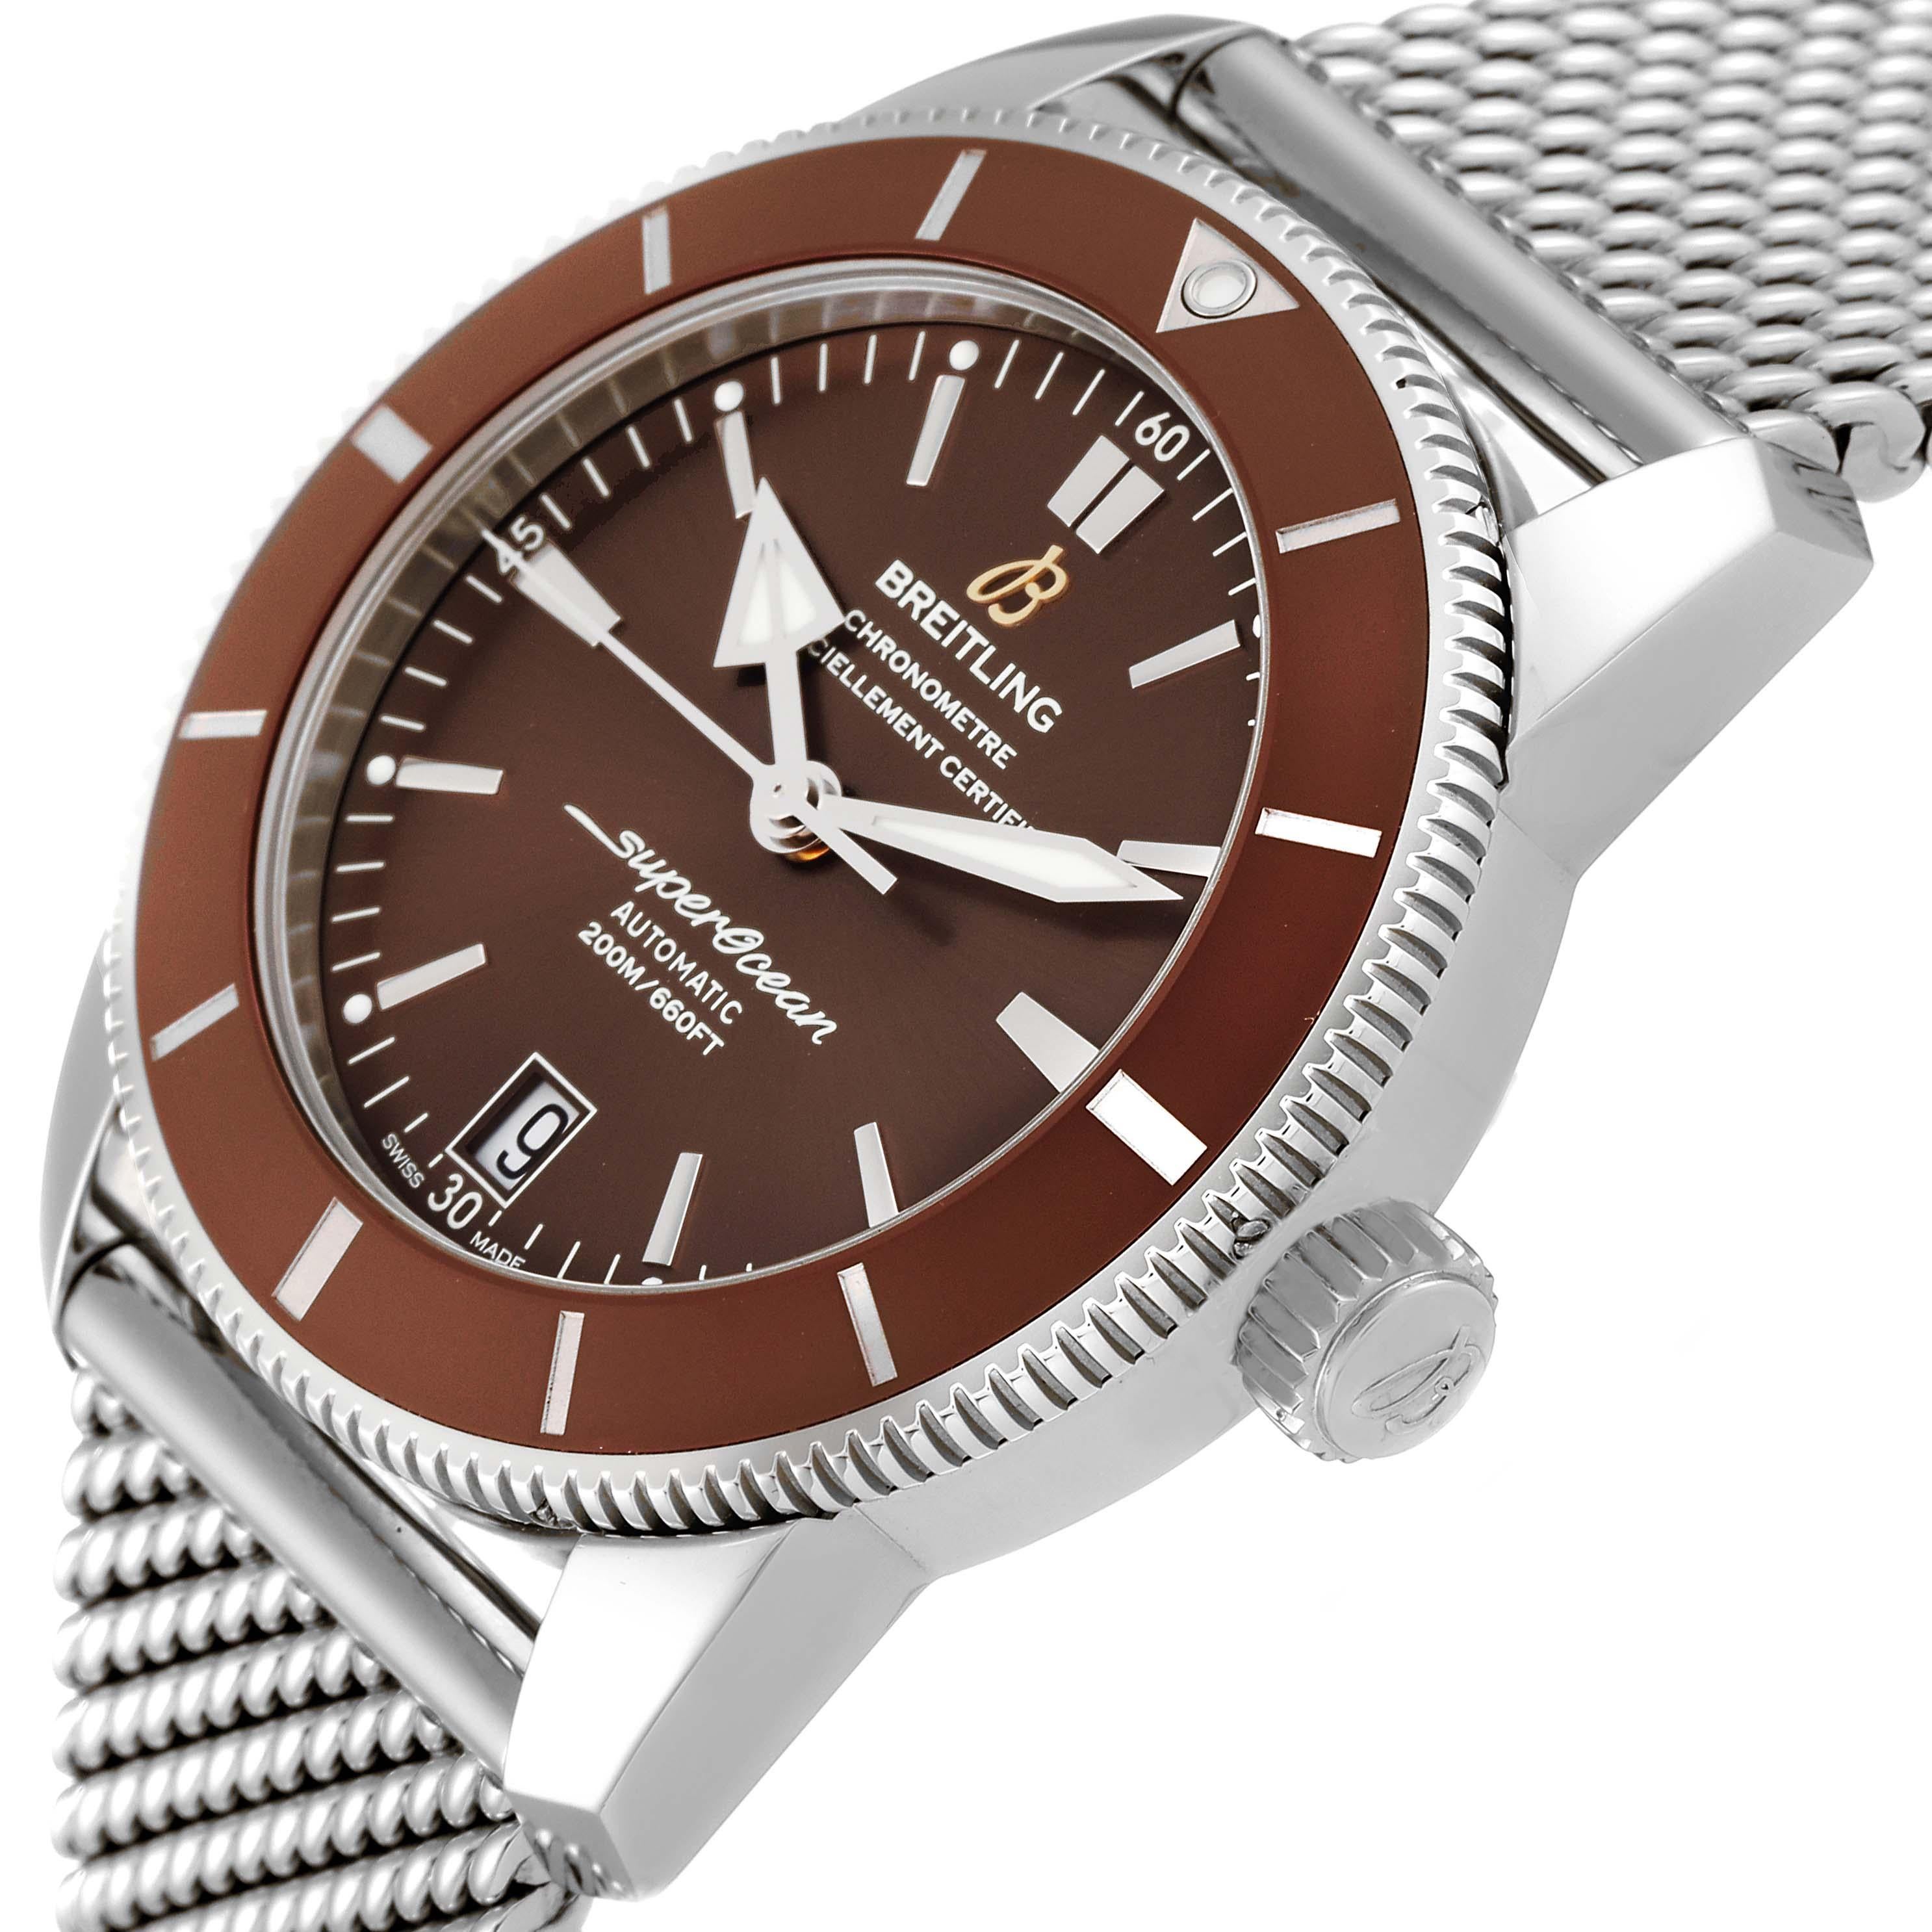 Breitling Superocean Heritage II 42 Brown Dial Steel Mens Watch AB2010 Box Card. Automatic self-winding B20 movement. Stainless steel case 42.0 mm in diameter. Stainless steel screwed-down crown. Brown ceramic unidirectional revolving bezel. Scratch